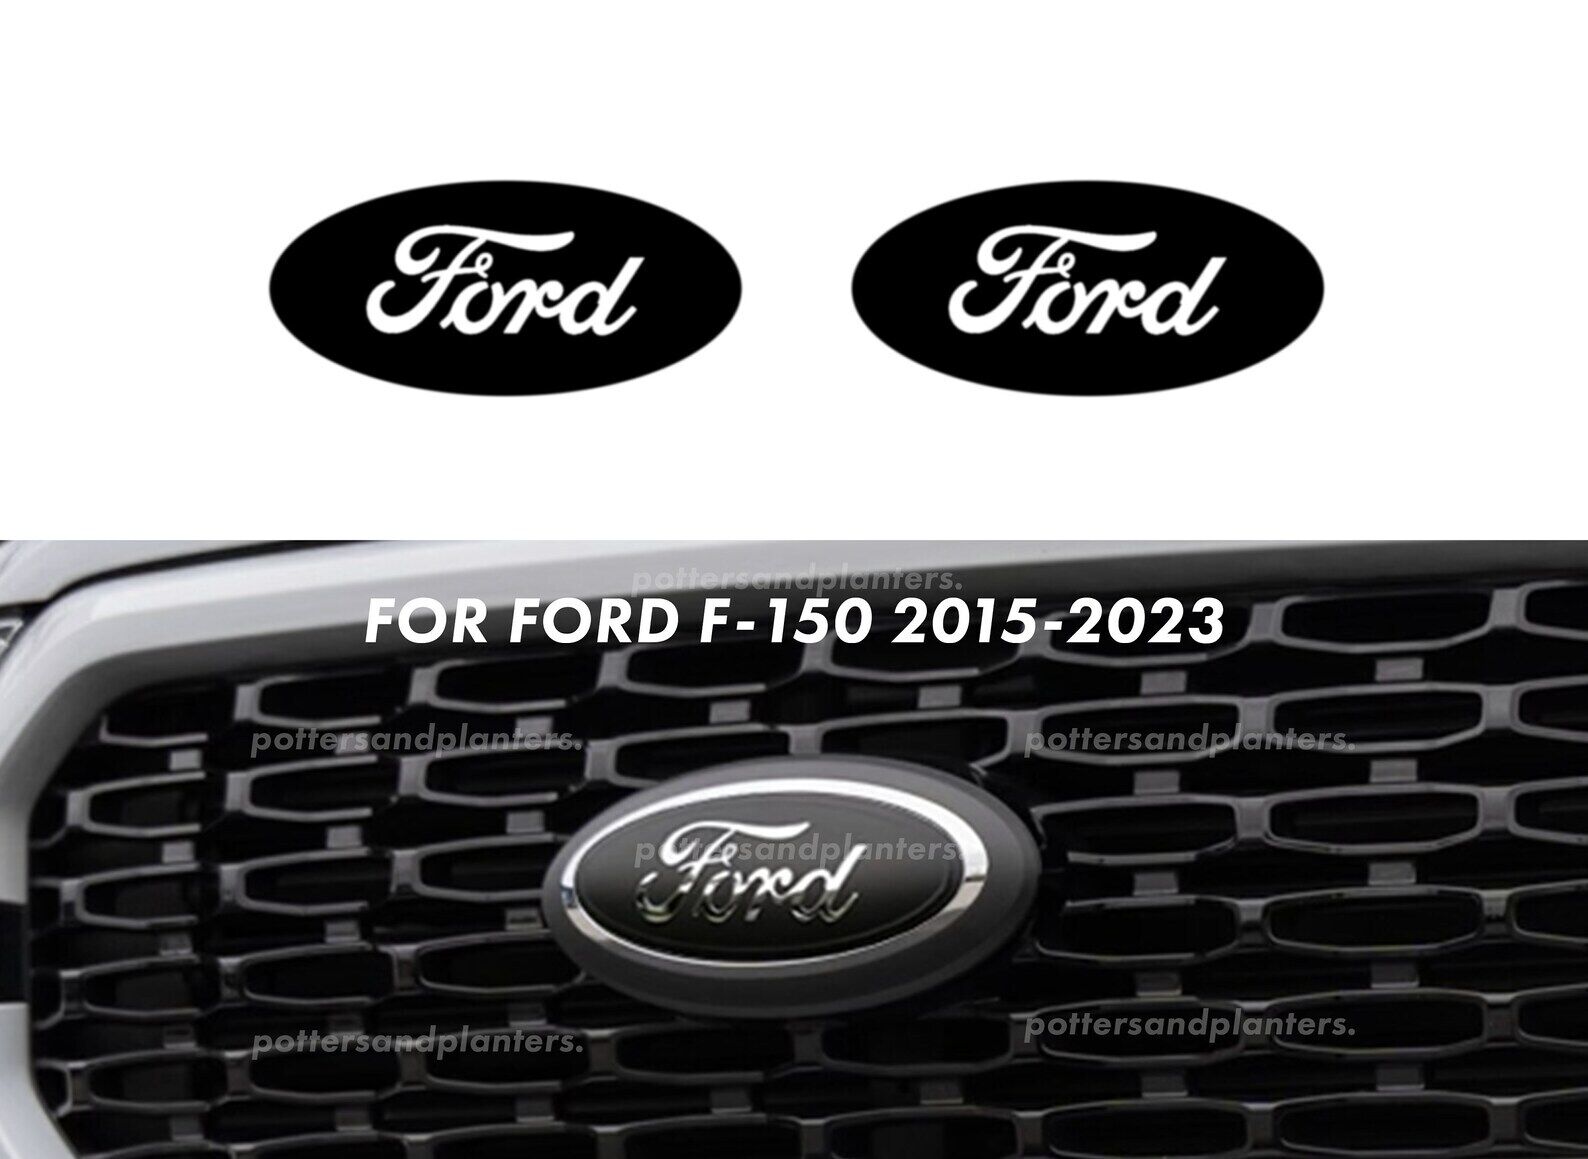 For 2015 - 2023 Ford F150 Emblem Vinyl Decal Overlay Die-Cut Insert Set of 2